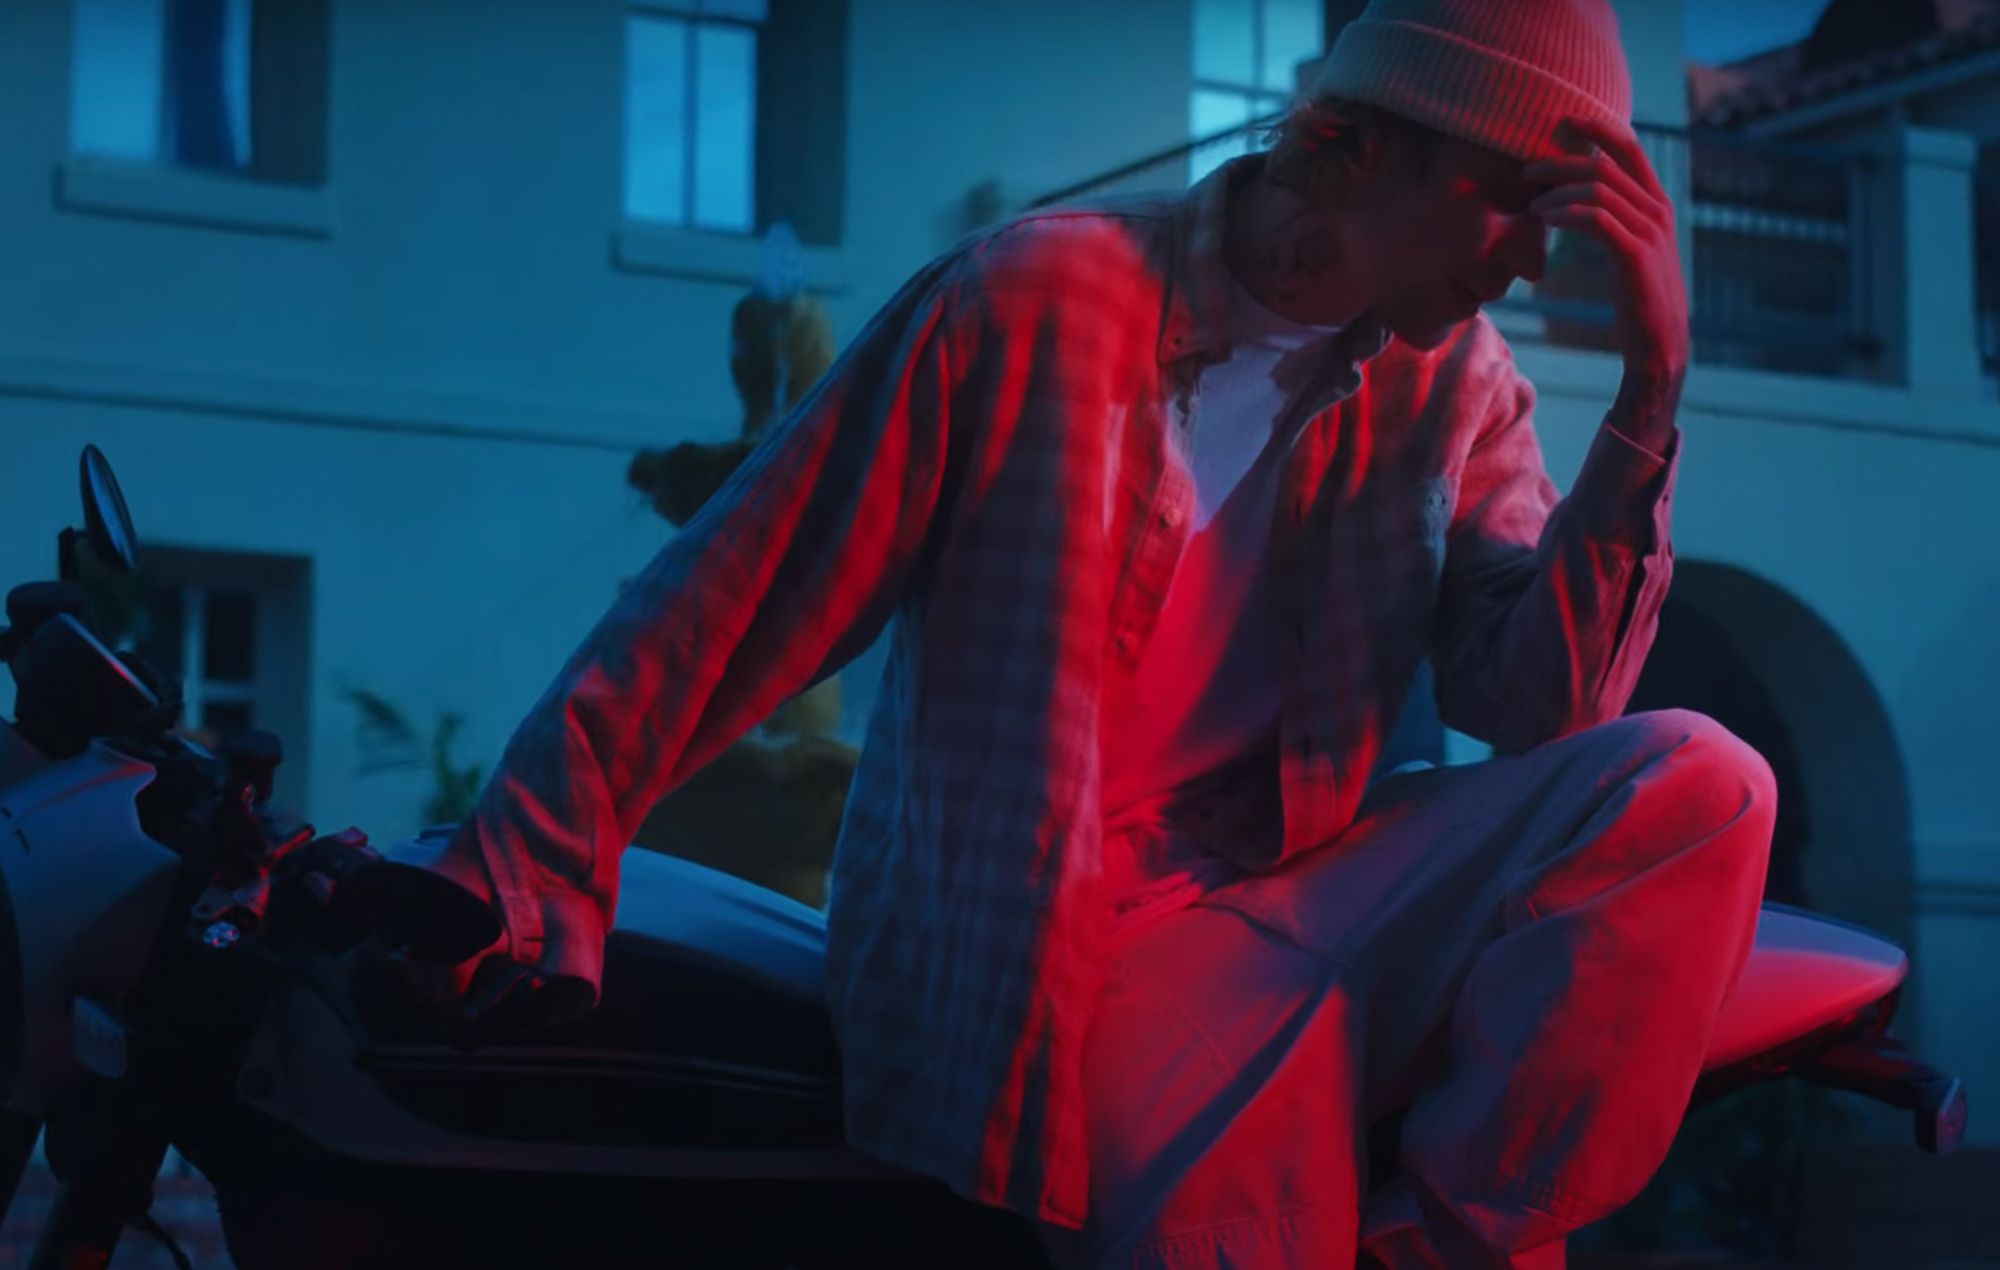 Justin Bieber is on the run in video for new single 'Hold On'